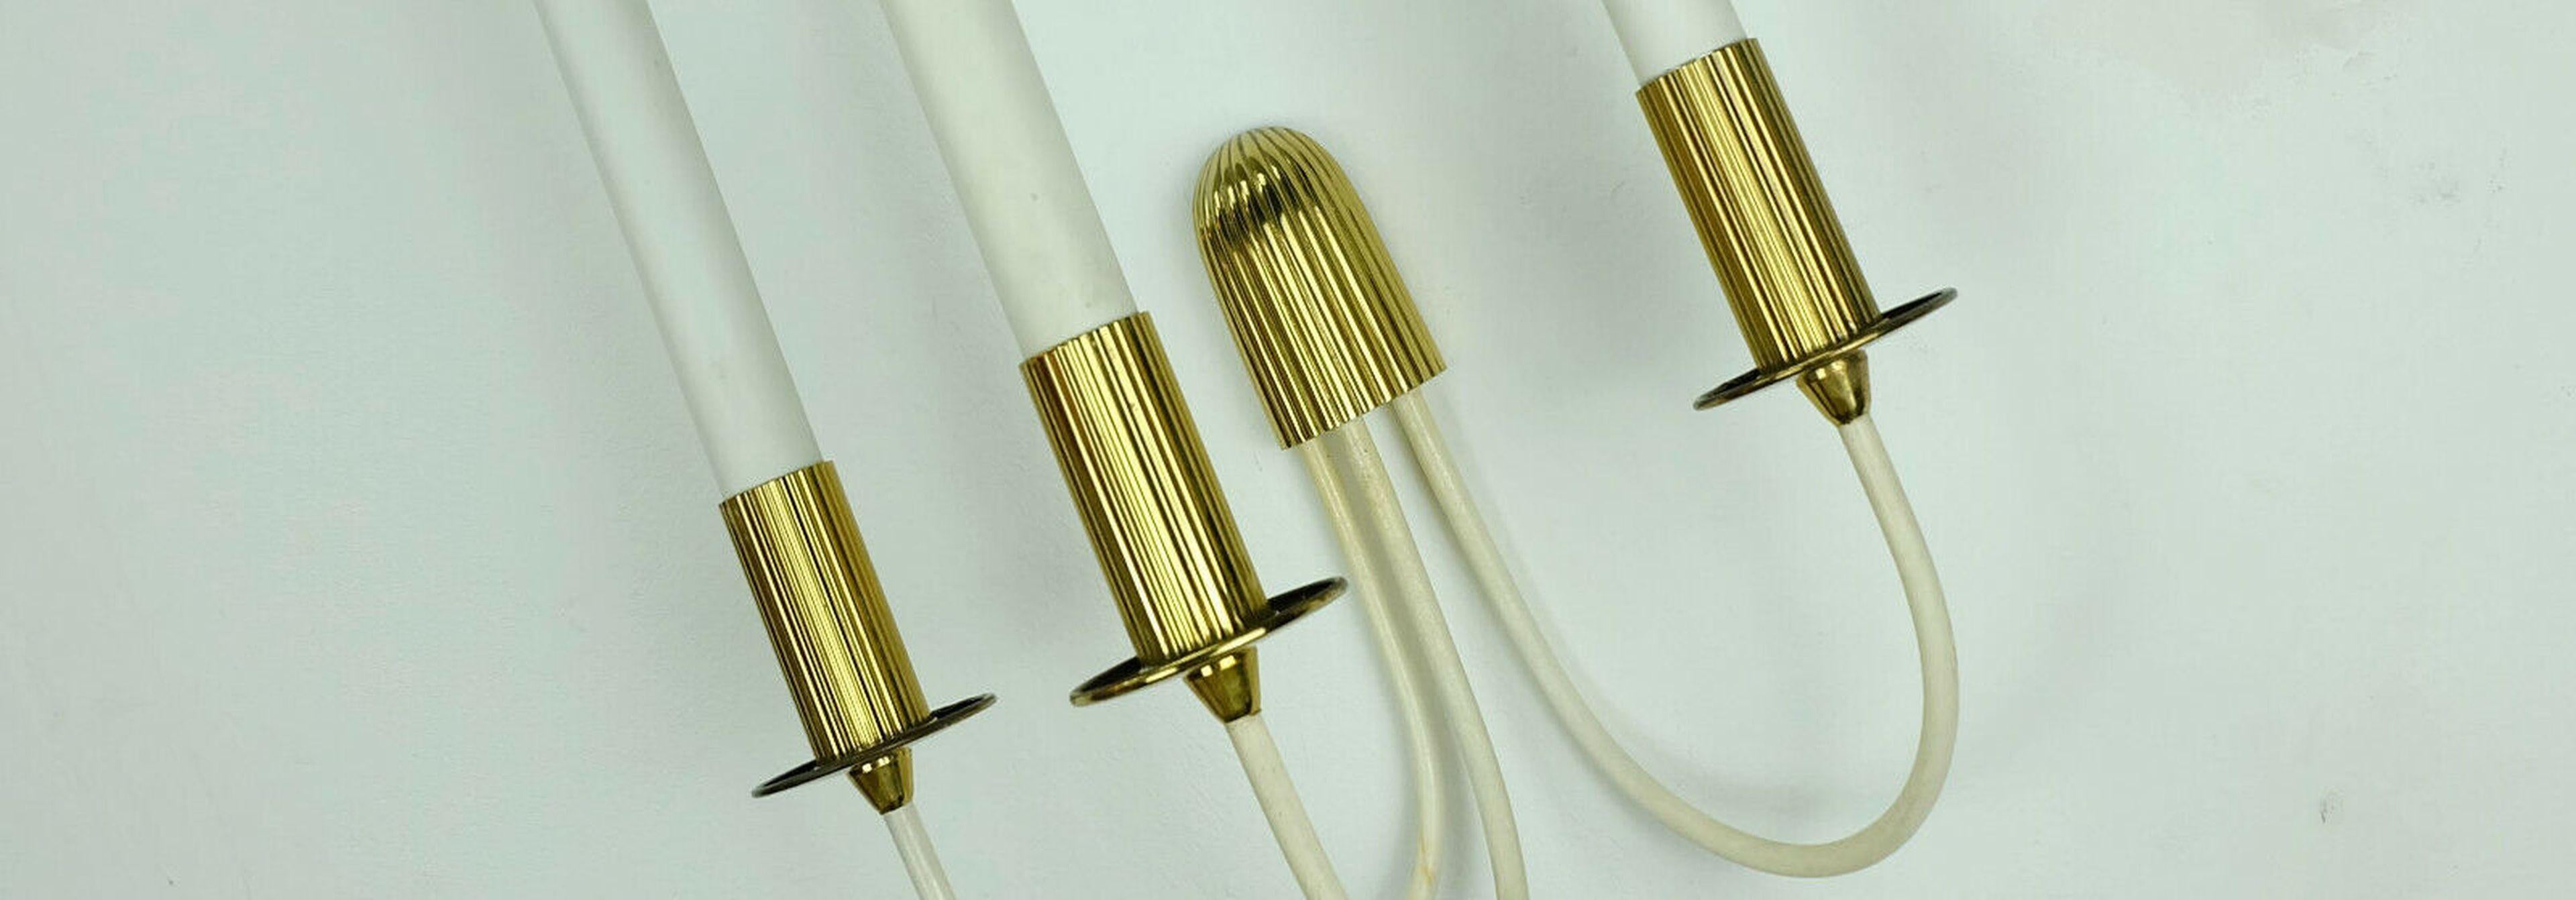 Very beautiful large 1950s to early 1960s midcentury wall lamp. Made of brass and off-white lacquered metal. For 3 E14 bulbs.

Good condition with minor wear. The lamp is in full working order. We recommend professional installation.
 
Measures: